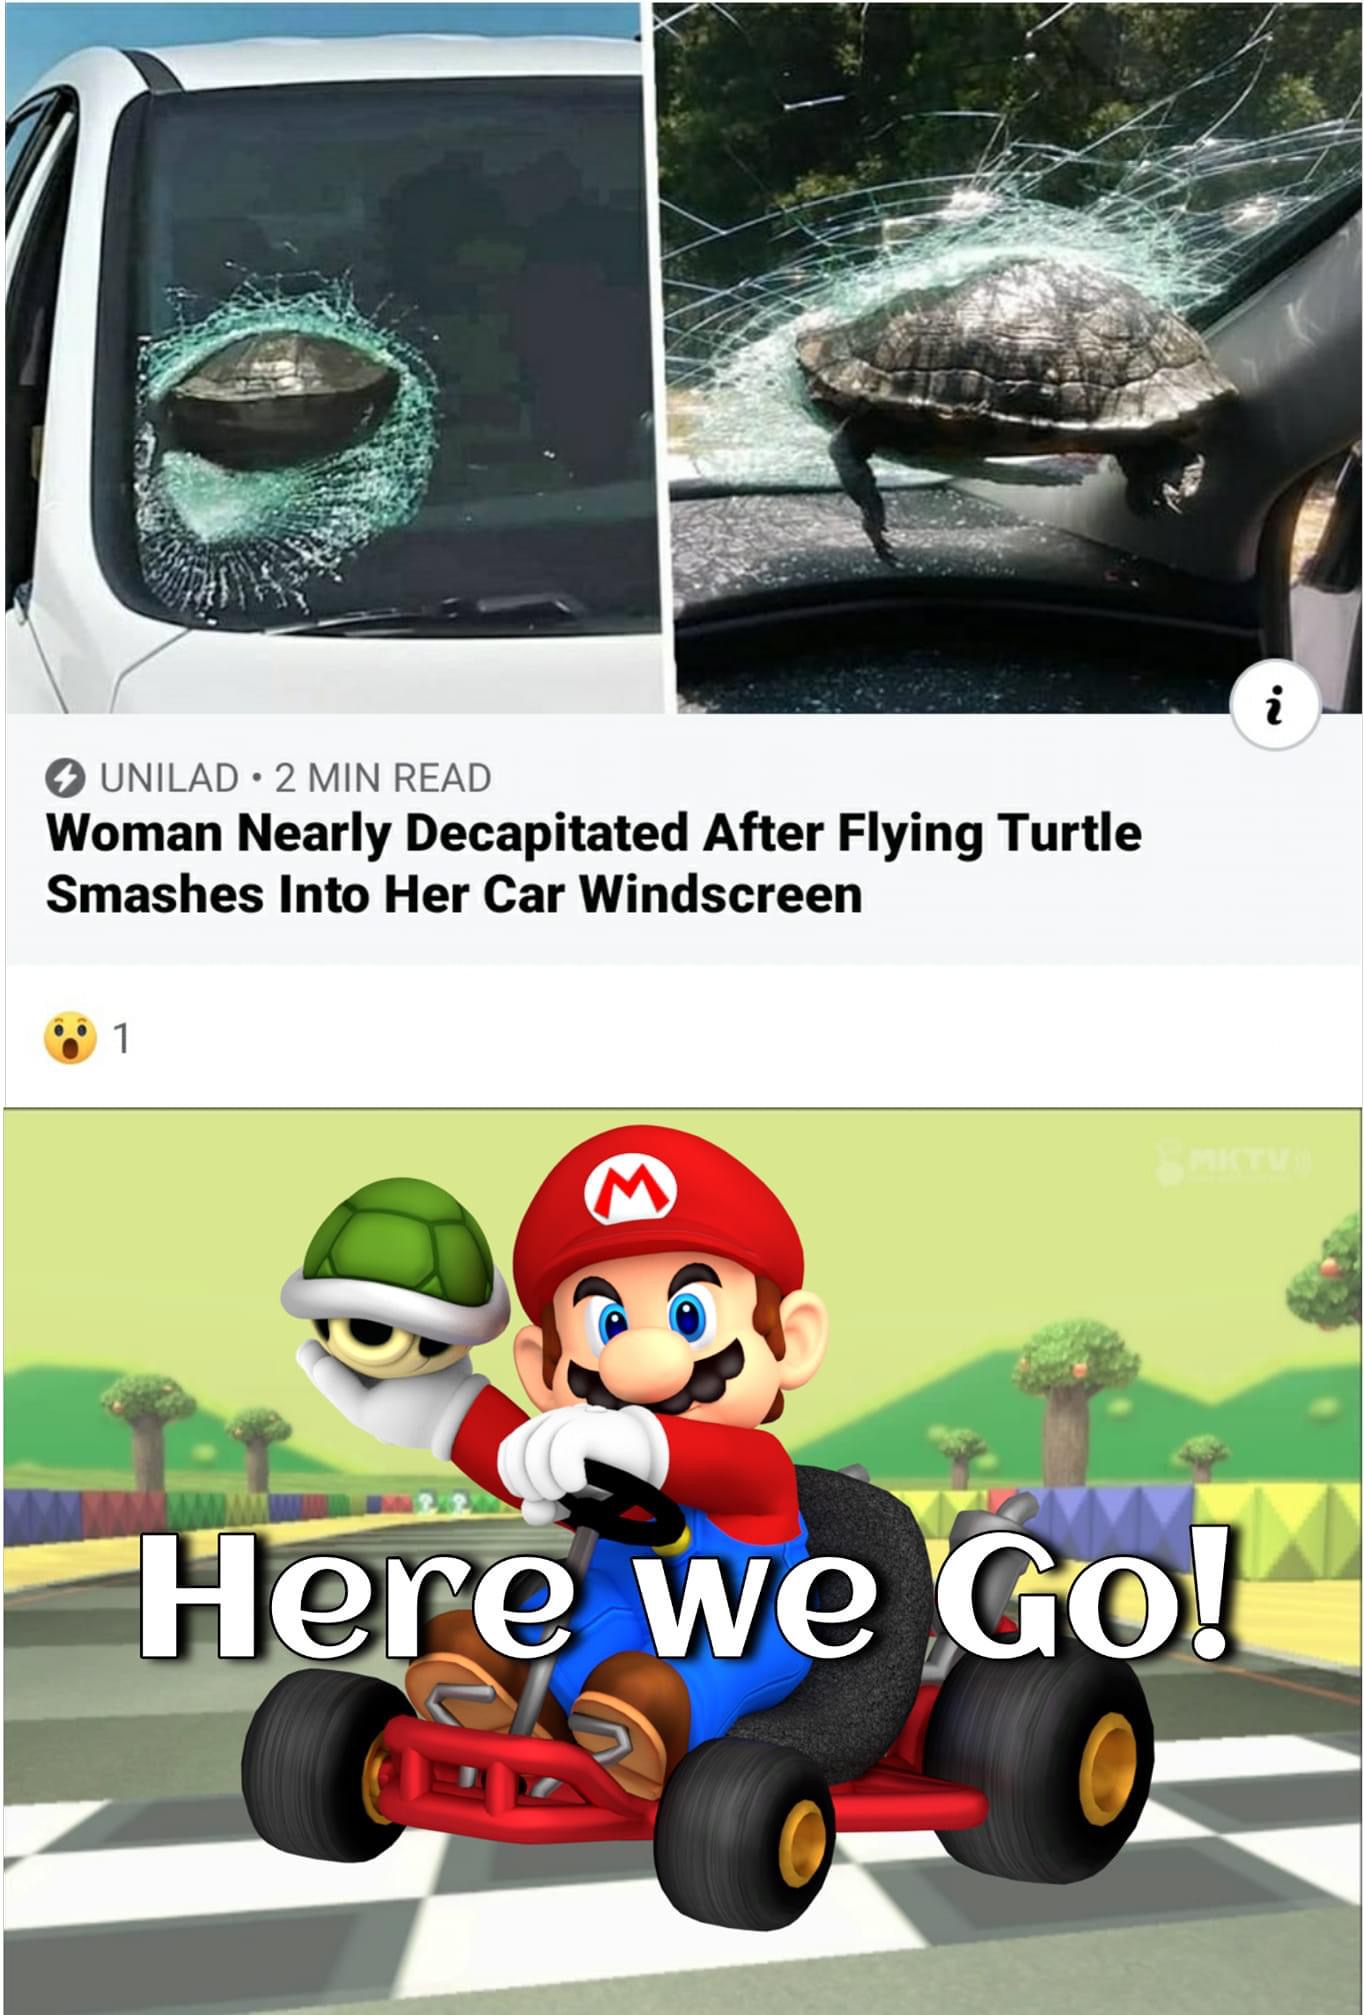 Mario Kart - i Unilad 2 Min Read Woman Nearly Decapitated After Flying Turtle Smashes Into Her Car Windscreen 1 M Here we Go!